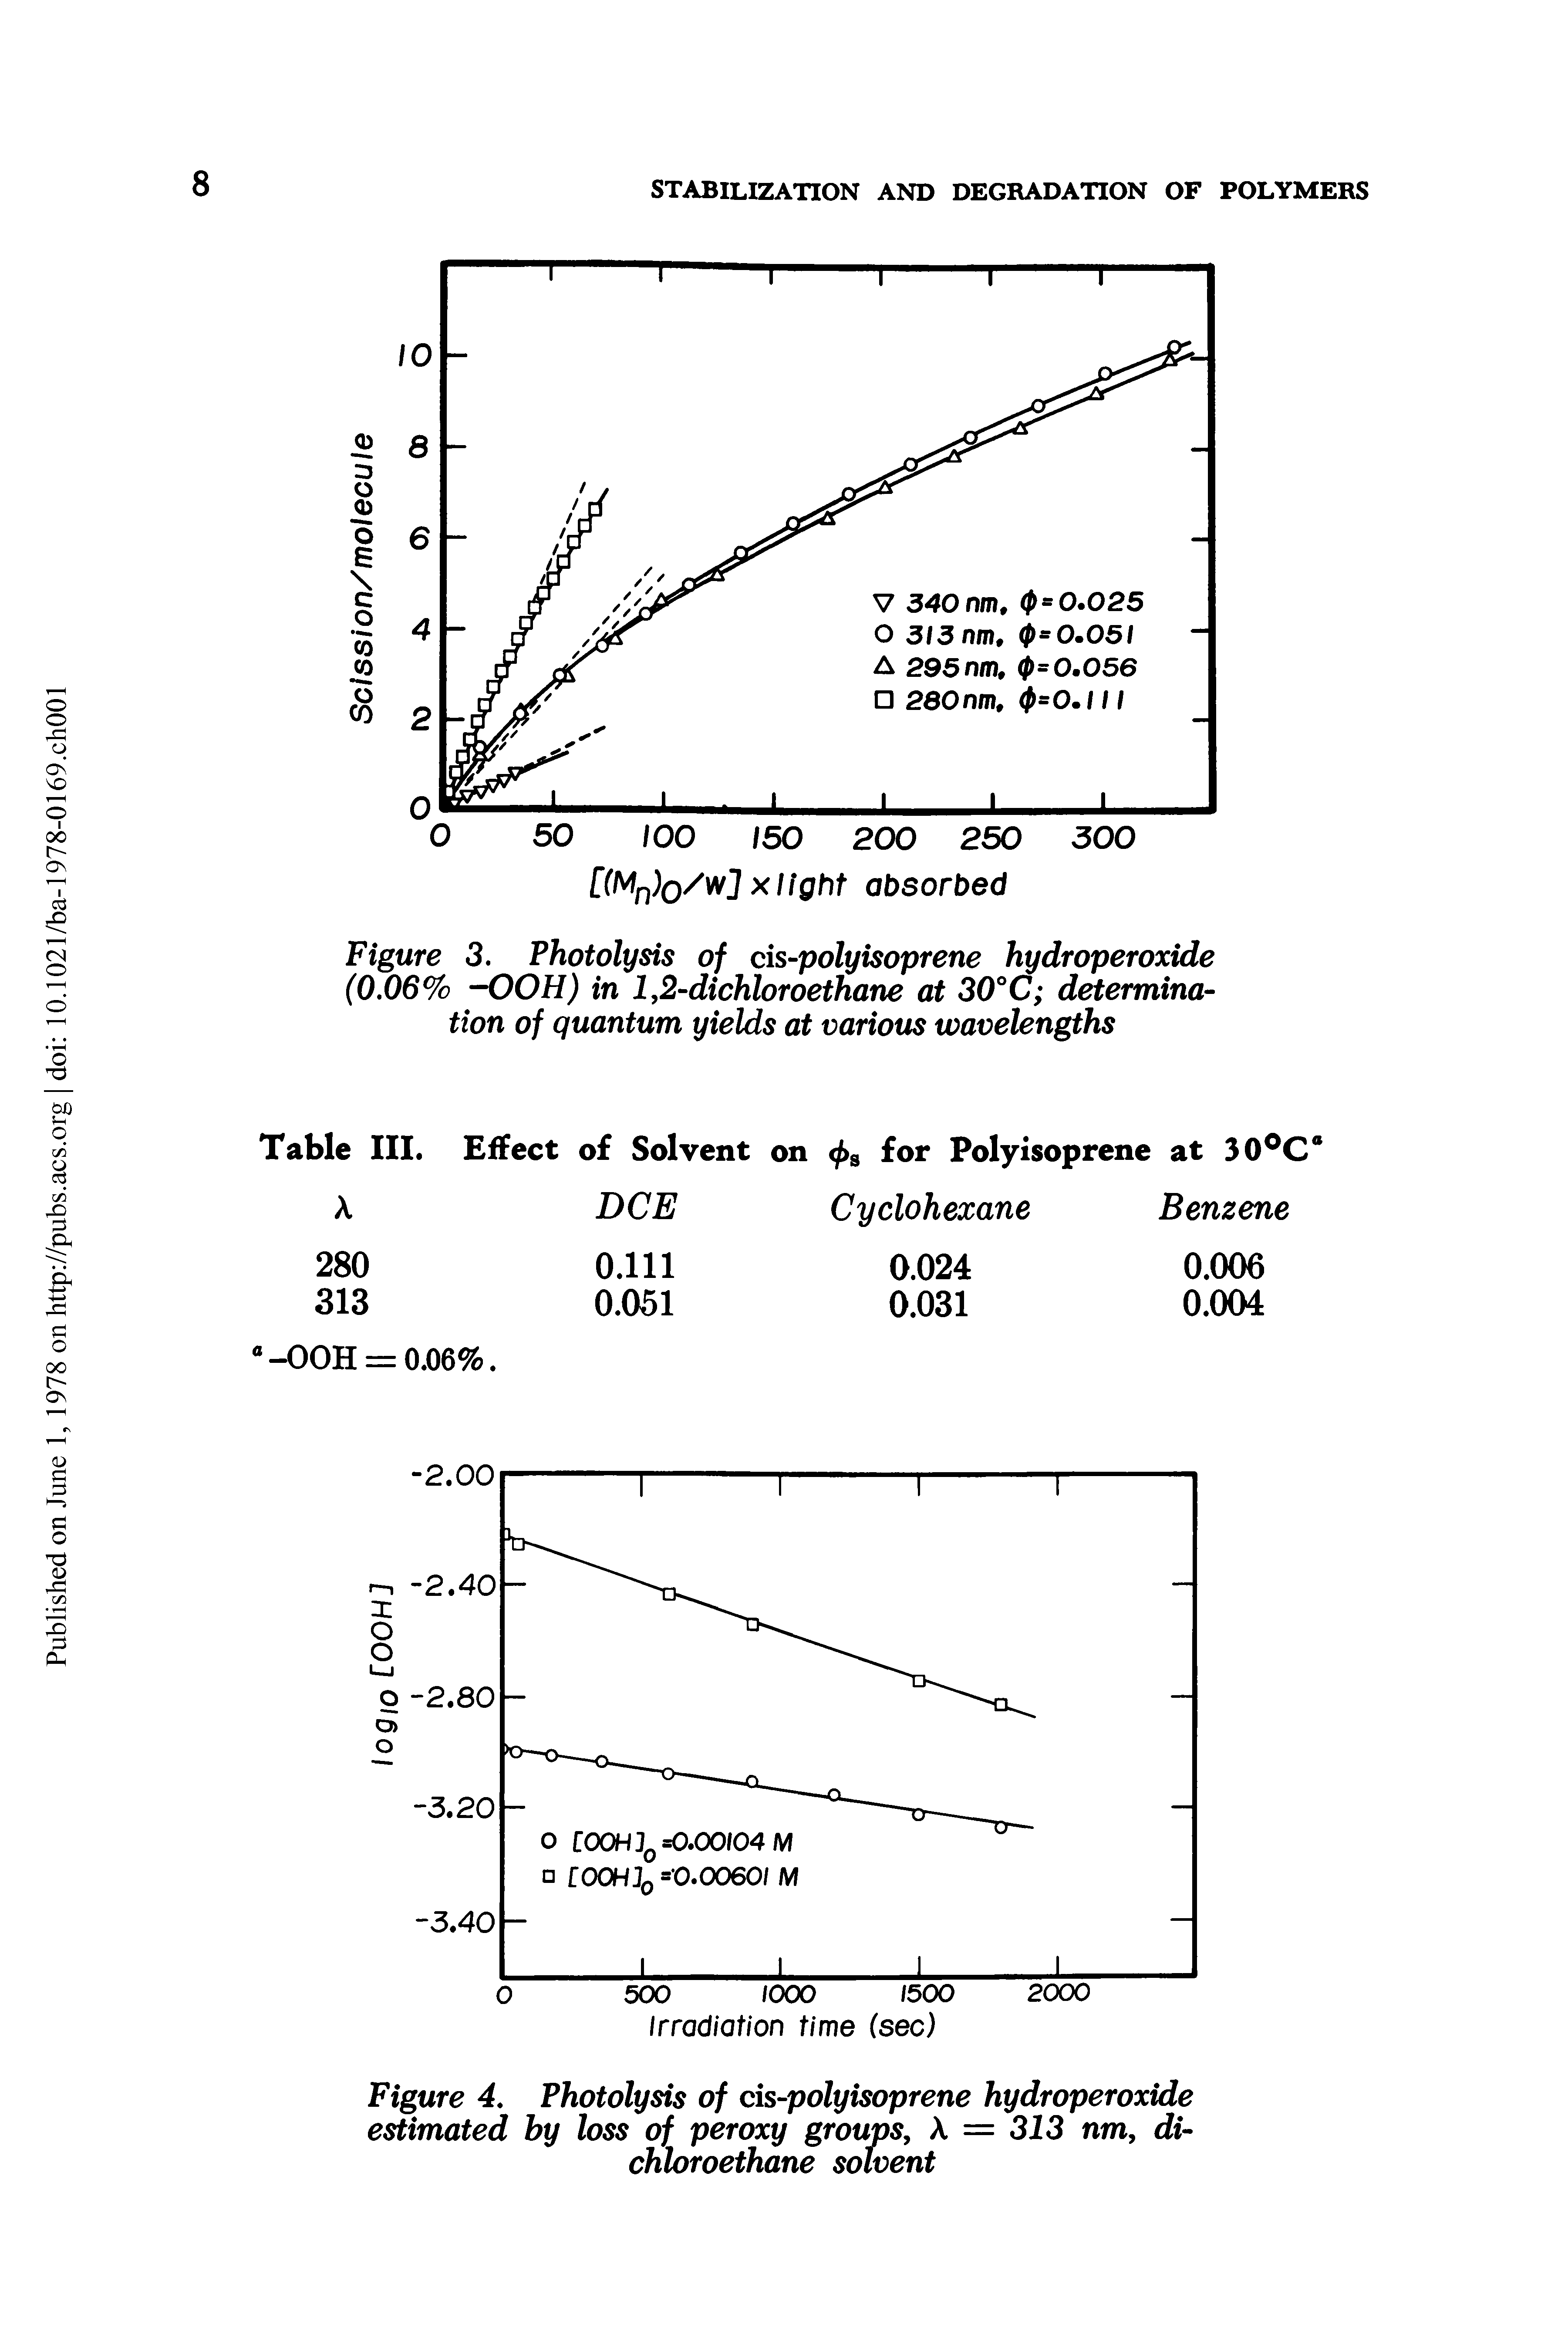 Figure 3. Photolysis of cis-polyisoprene hydroperoxide (0.06% -00H) in 1,2-dichloroethane at 30°C determination of quantum yields at various wavelengths...